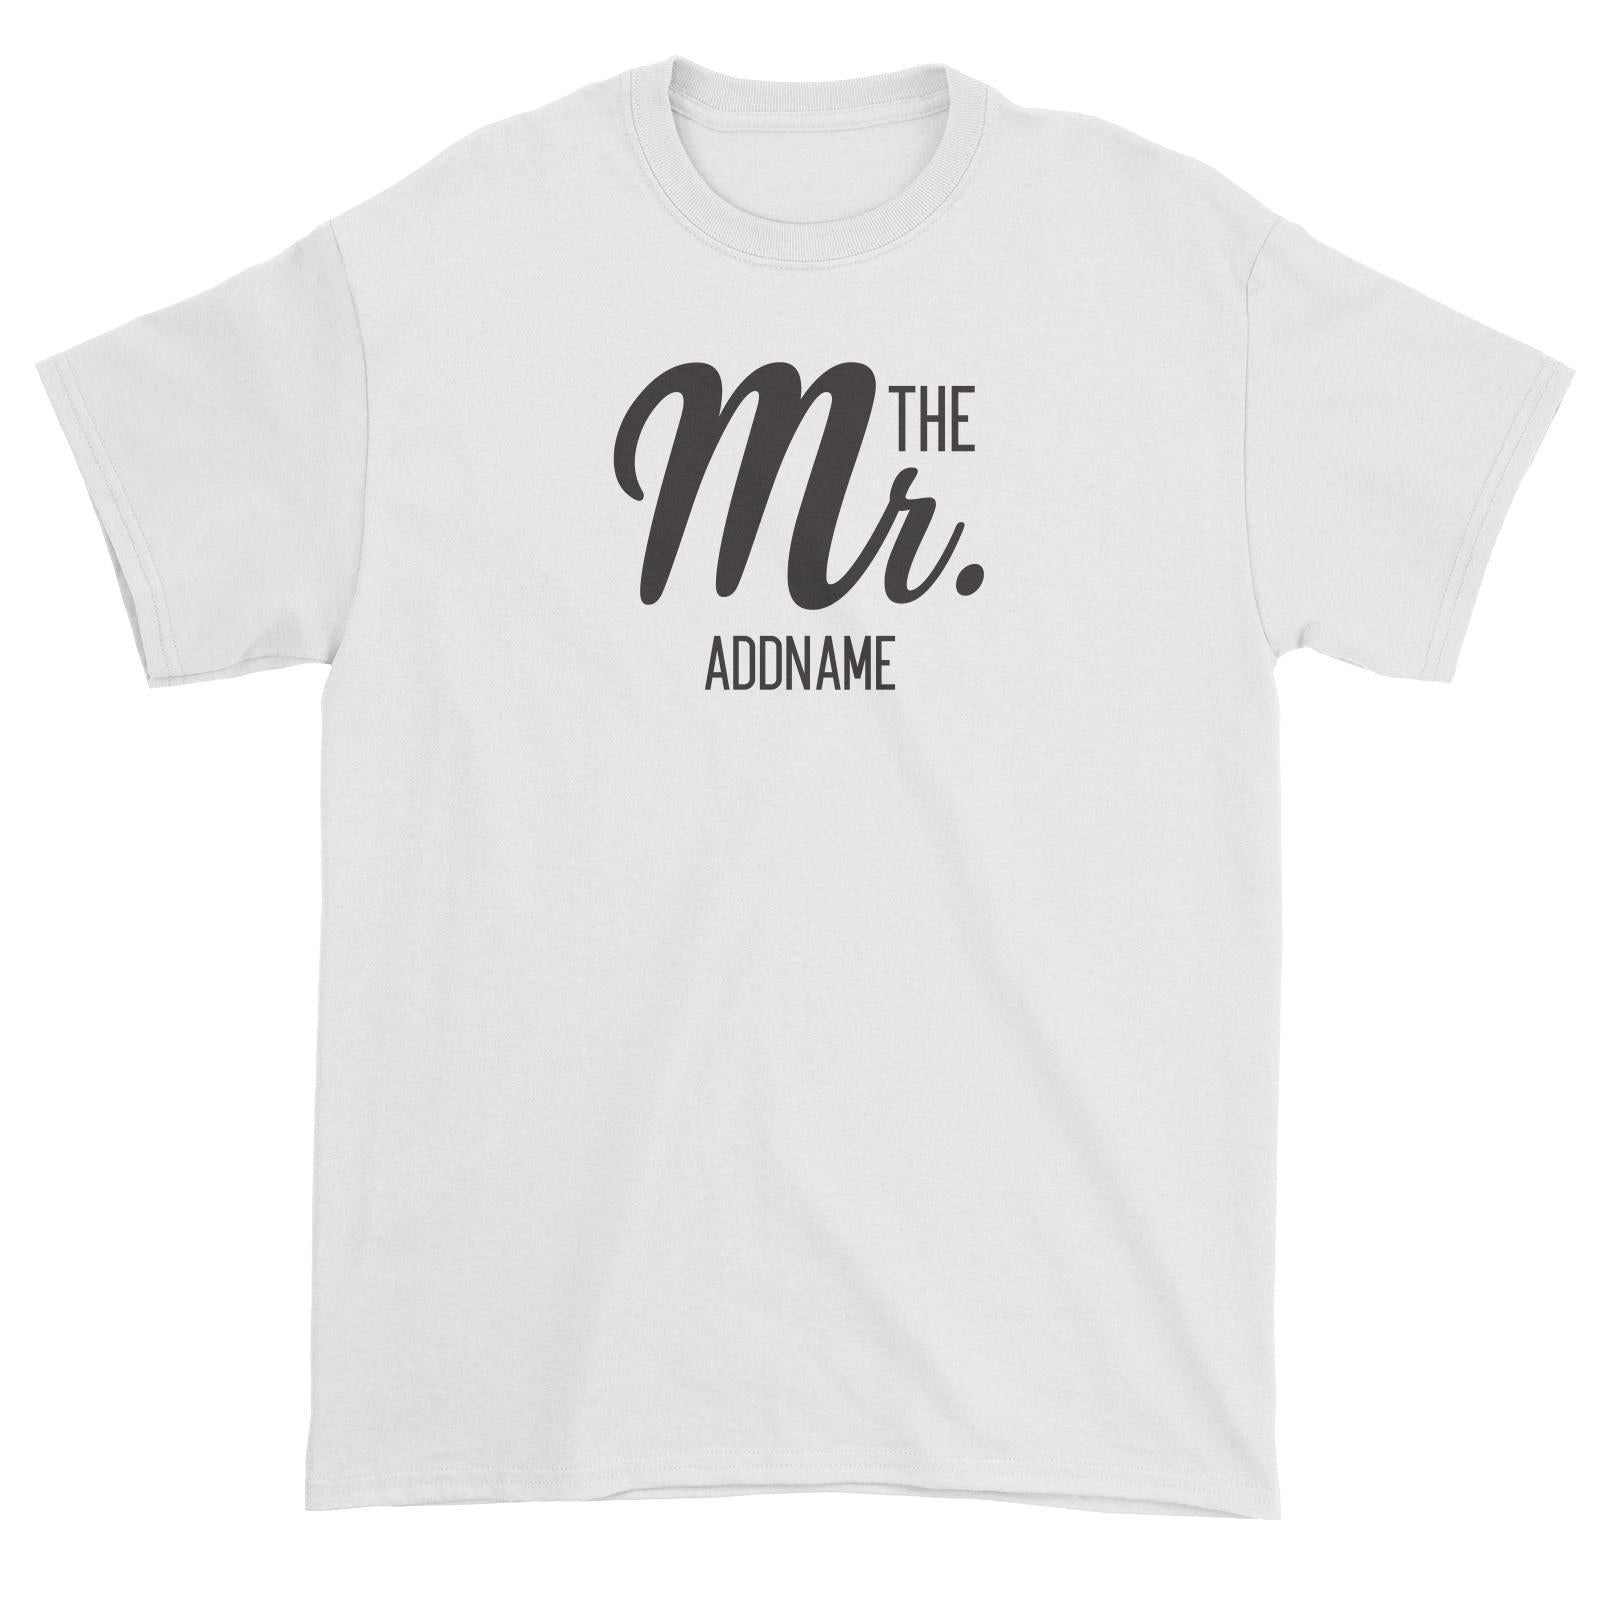 Husband and Wife The Mr. Addname Unisex T-Shirt